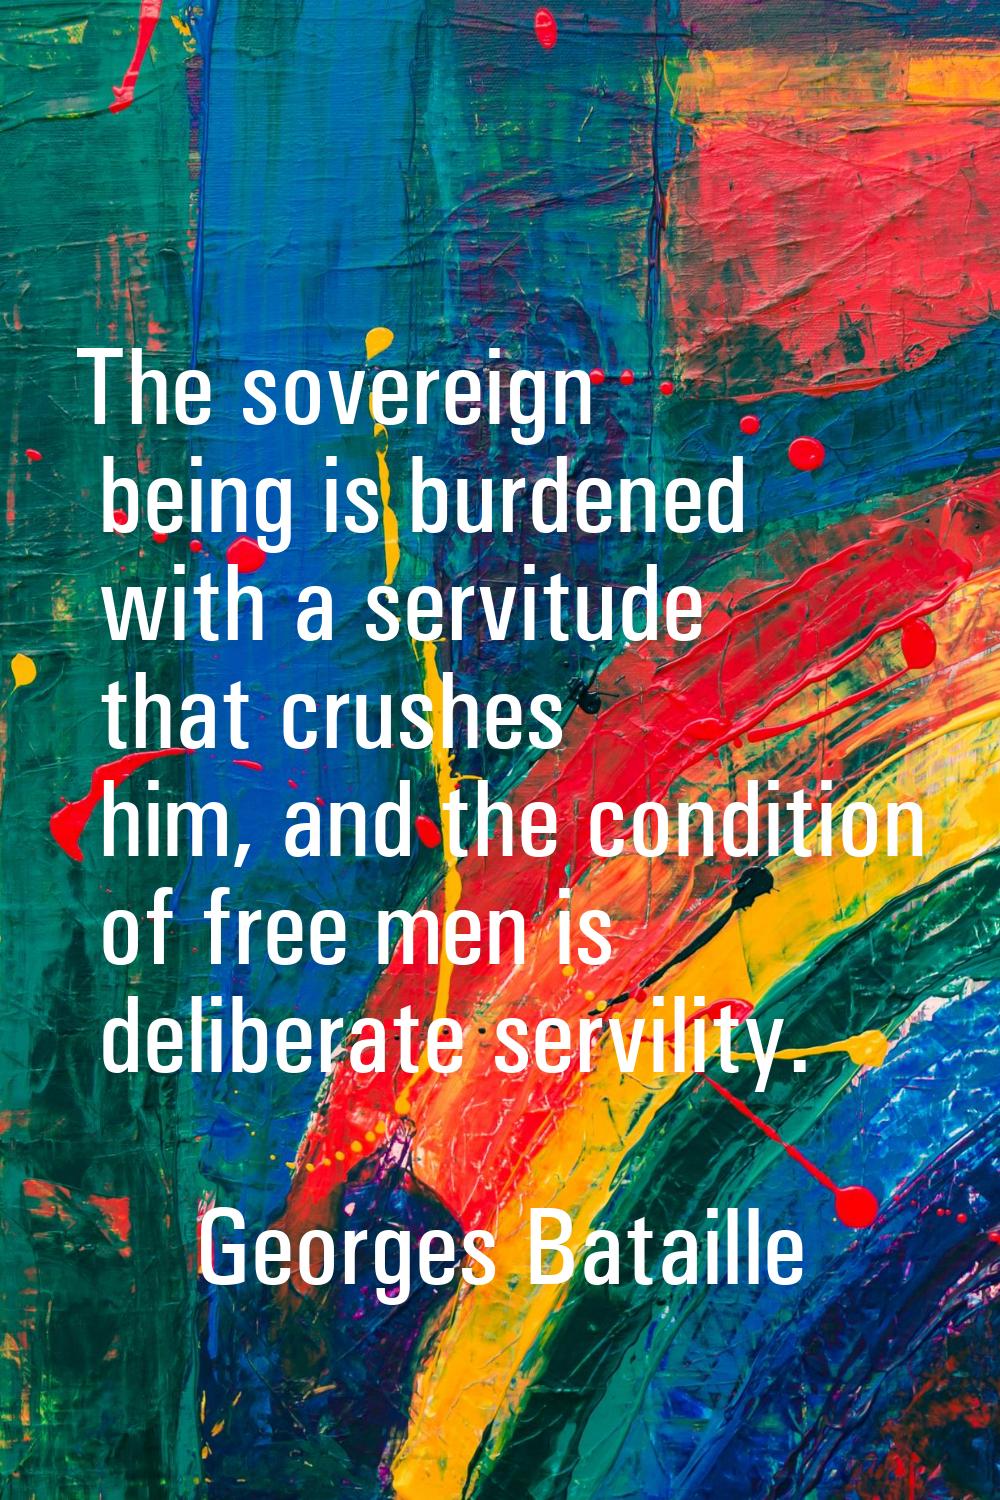 The sovereign being is burdened with a servitude that crushes him, and the condition of free men is